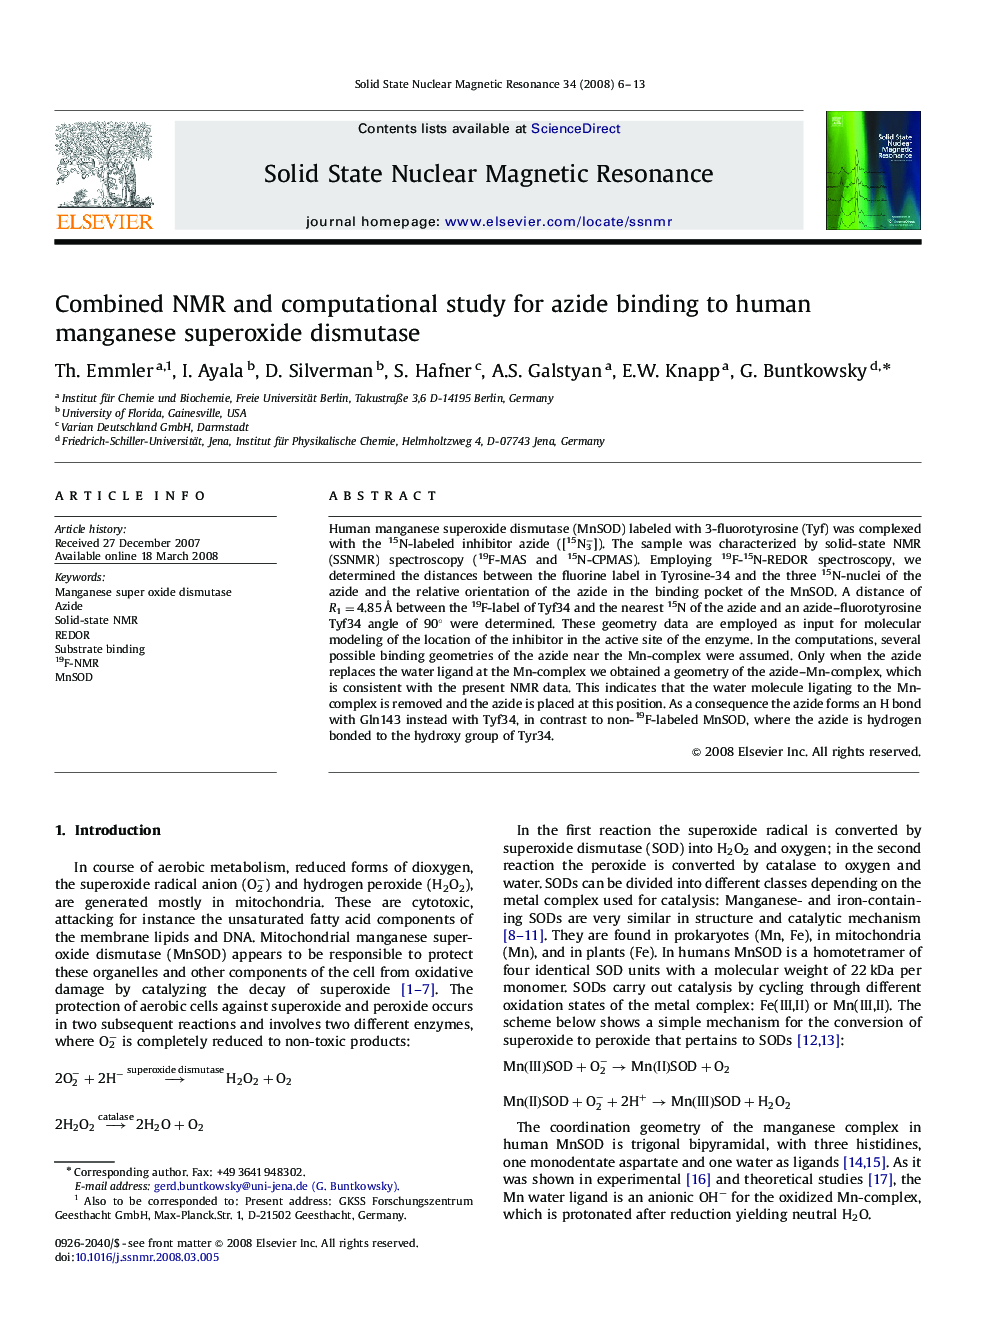 Combined NMR and computational study for azide binding to human manganese superoxide dismutase